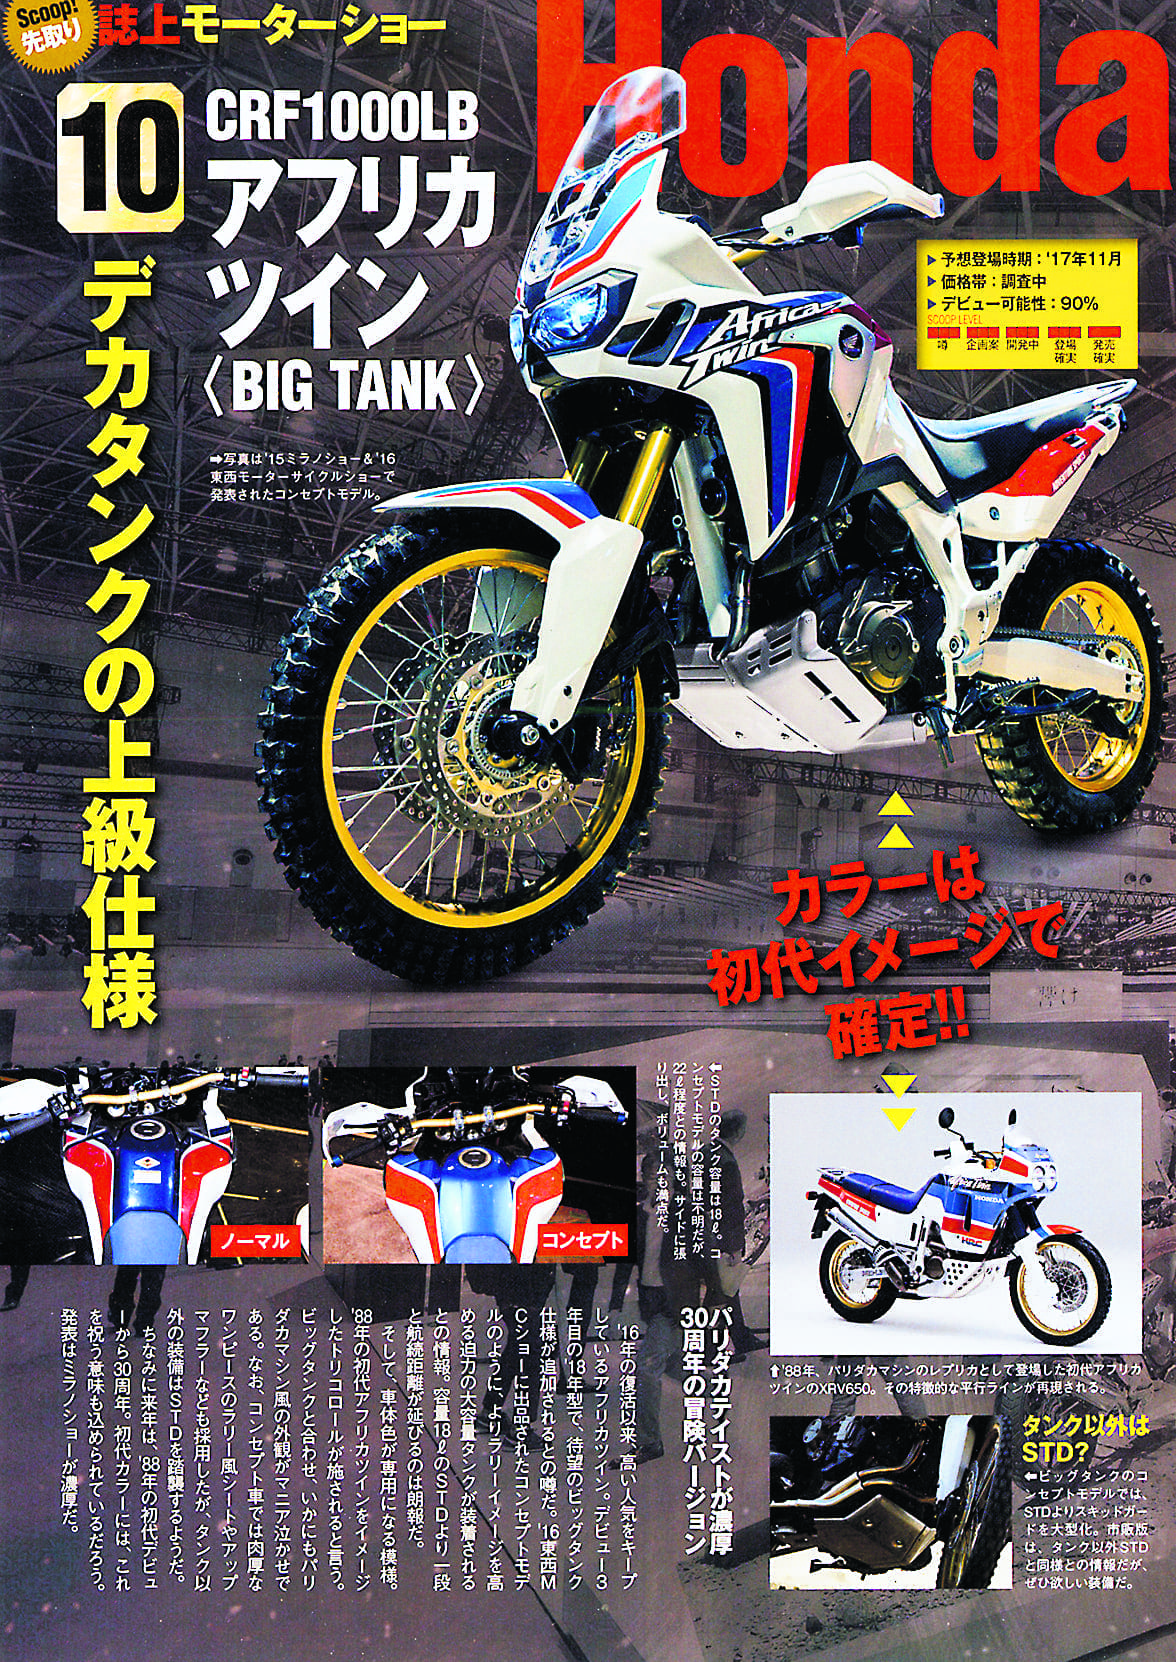 2018 Africa Twin going ‘big tank’ and more enduro